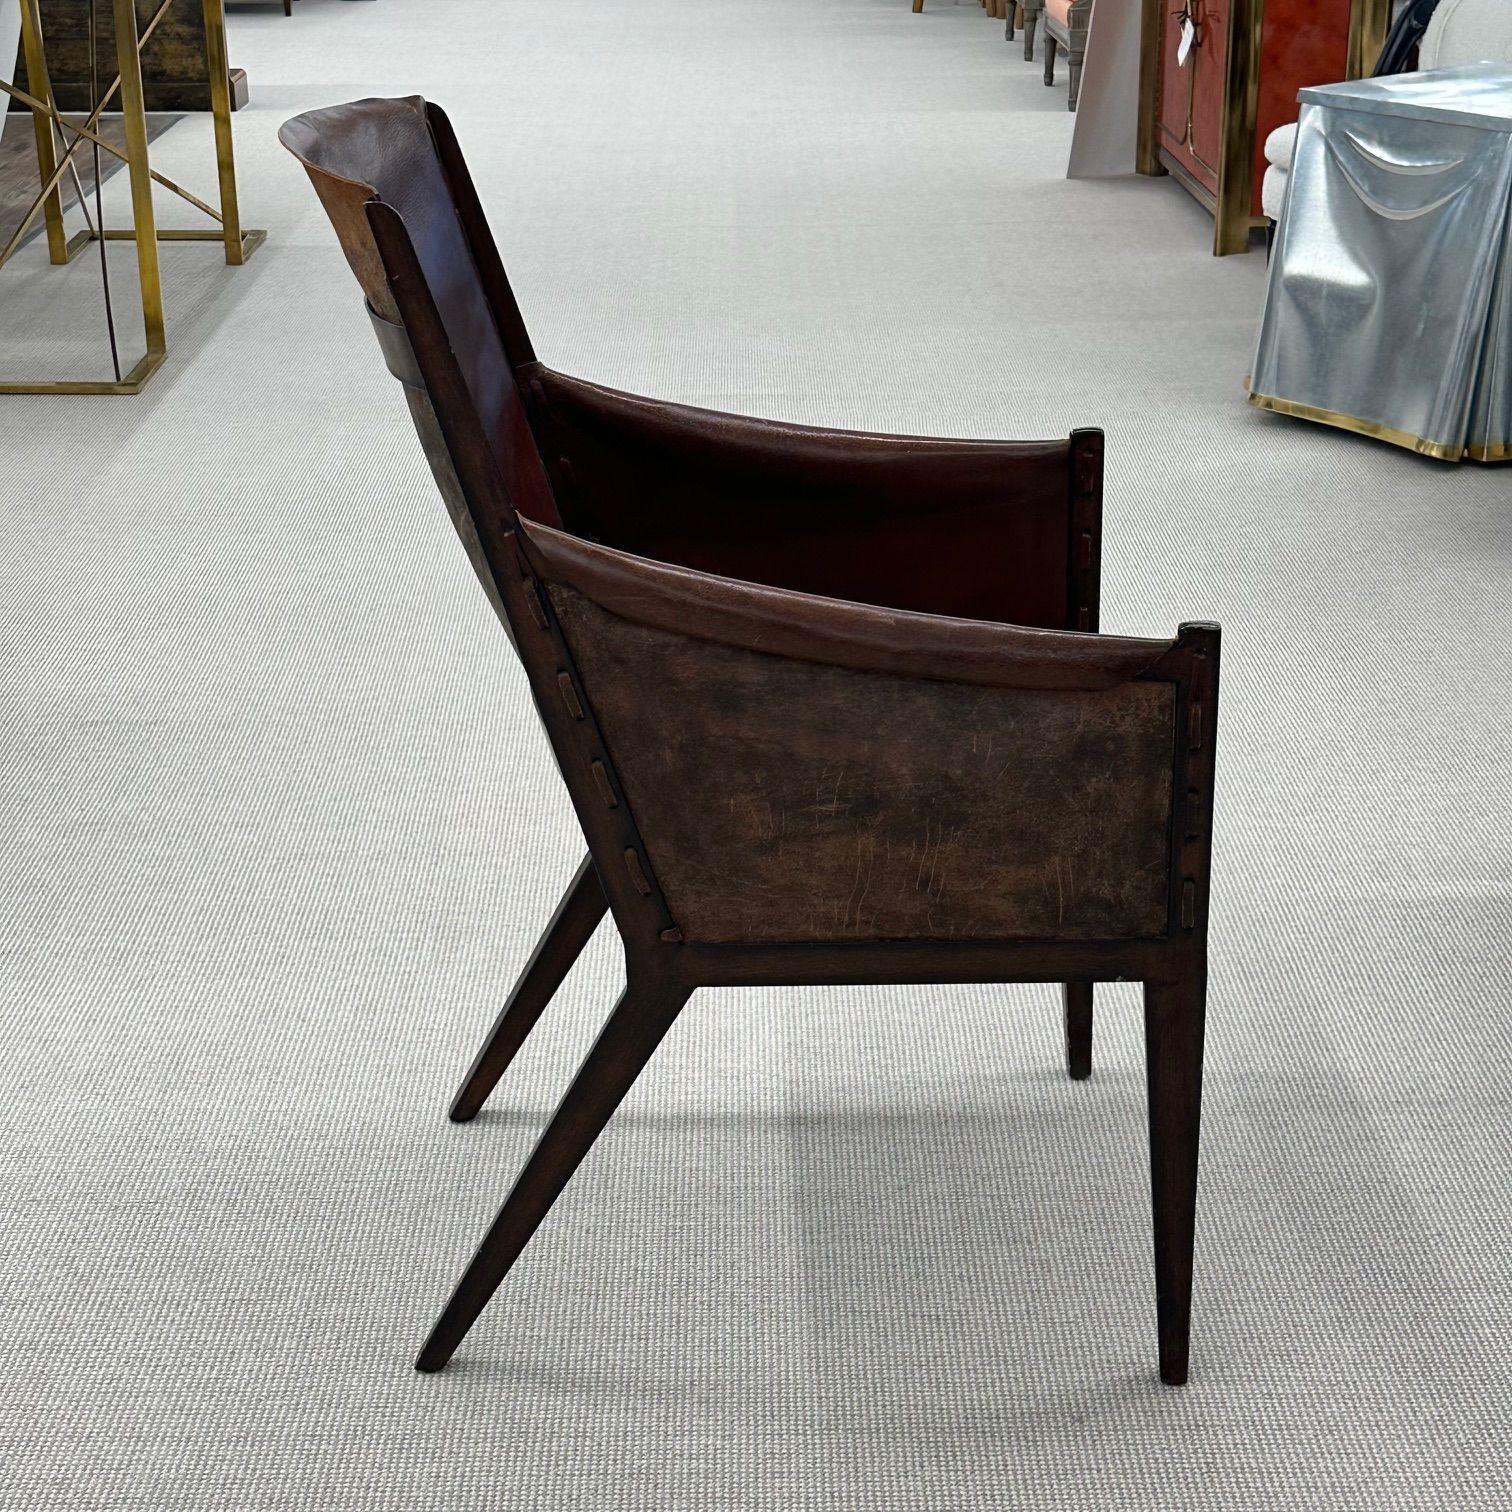 Jean-Michel Frank Style, Mid-Century Modern, Arm Chairs, Distressed Leather In Good Condition For Sale In Stamford, CT